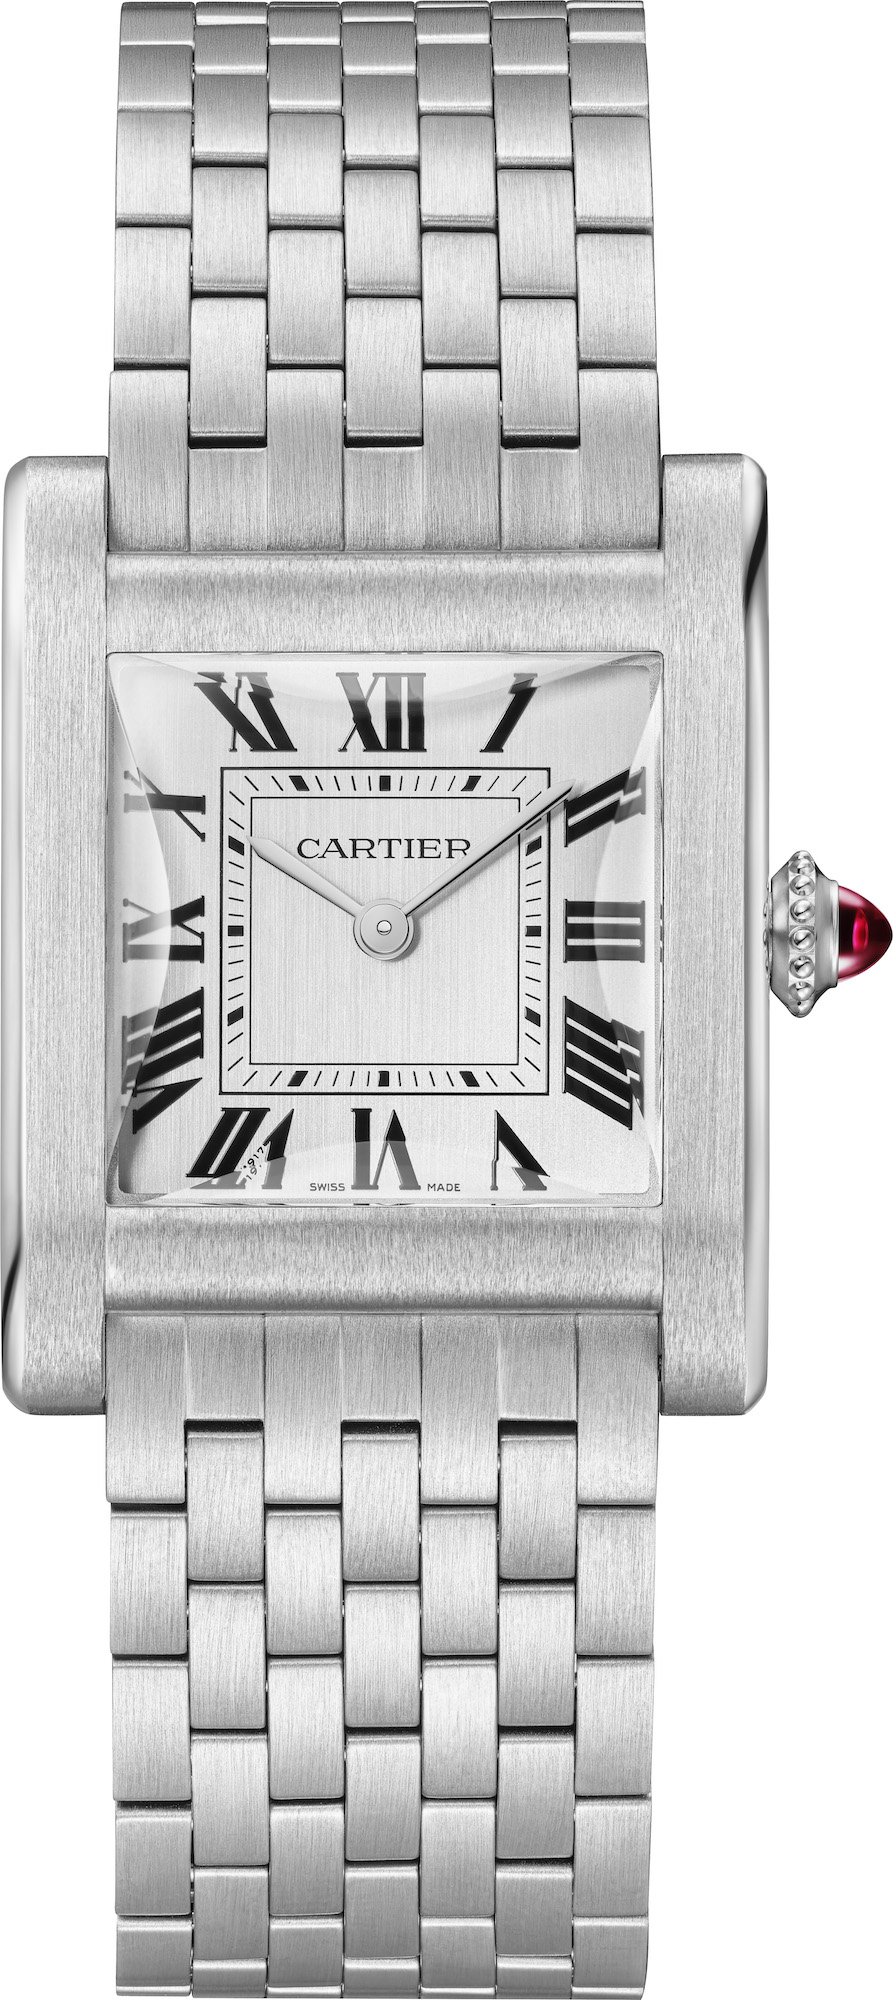 TANK NORMALE CARTIER PRIVE